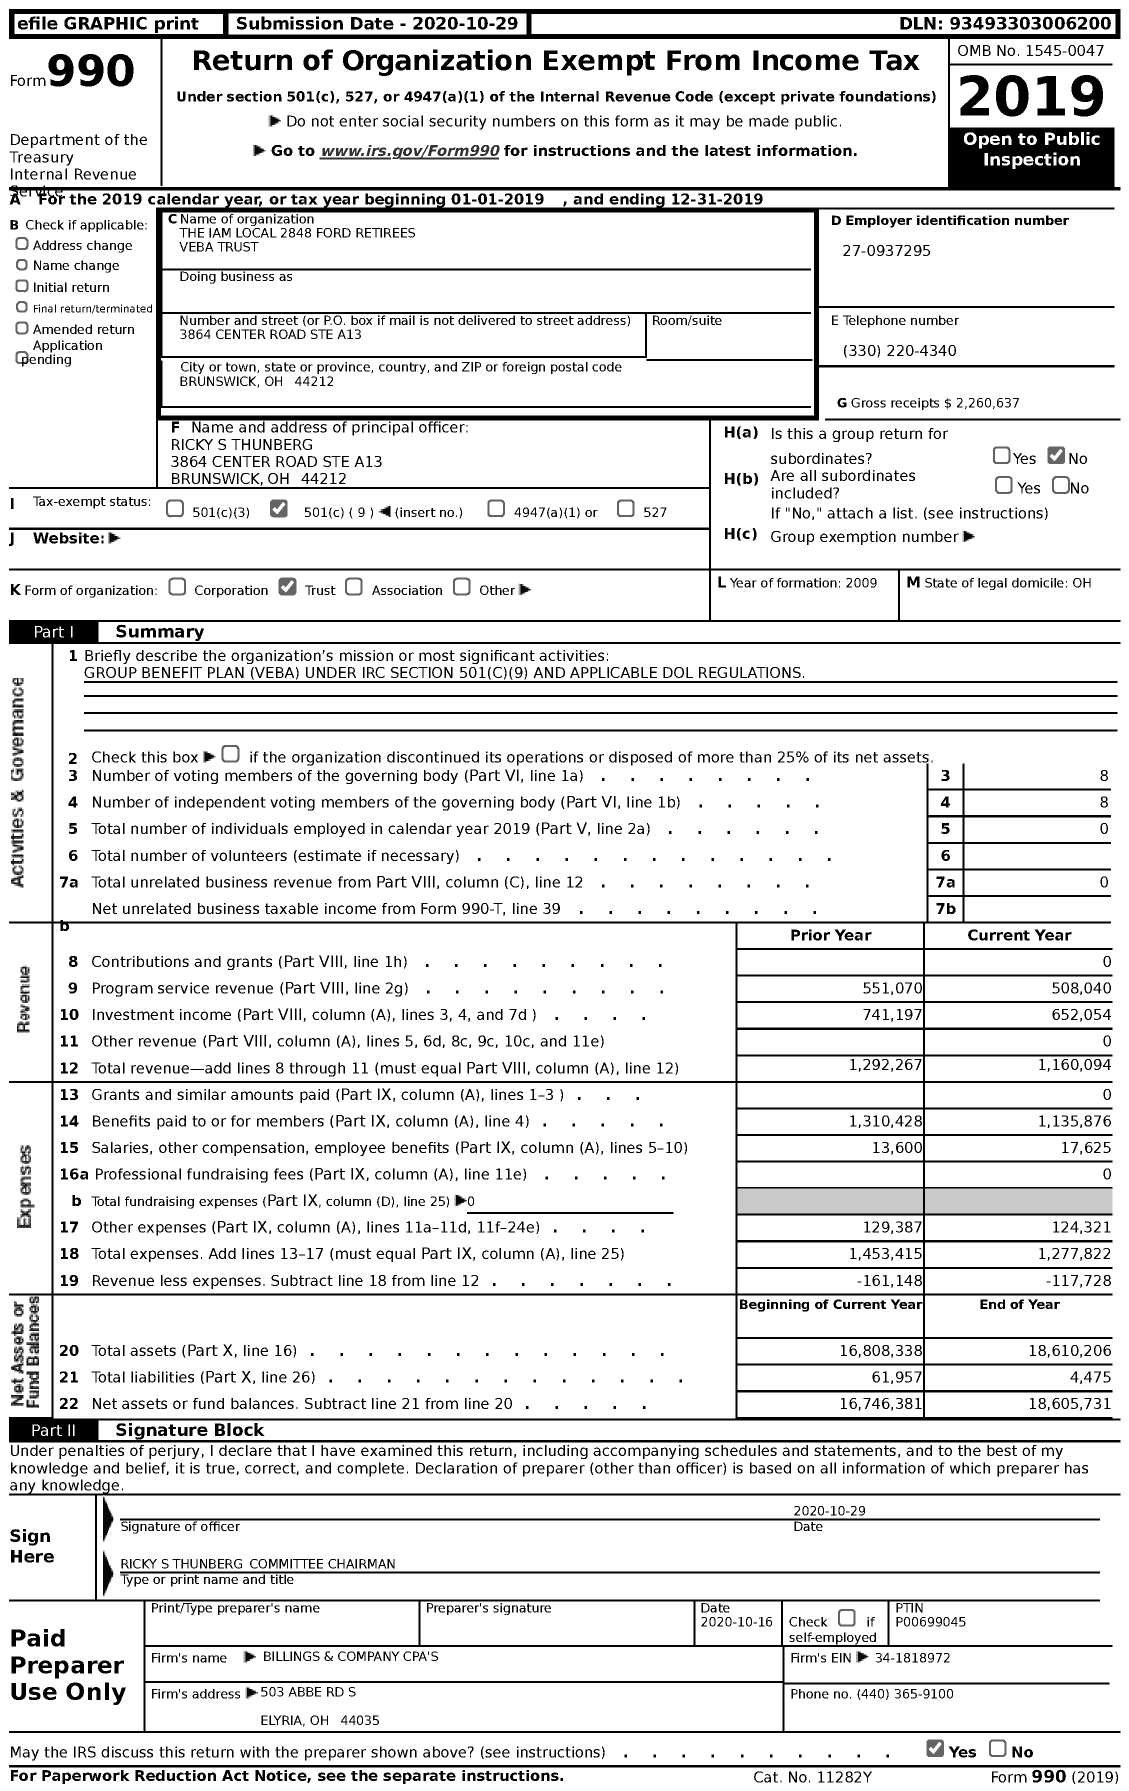 Image of first page of 2019 Form 990 for The Iam Local 2848 Ford Retirees Veba Trust